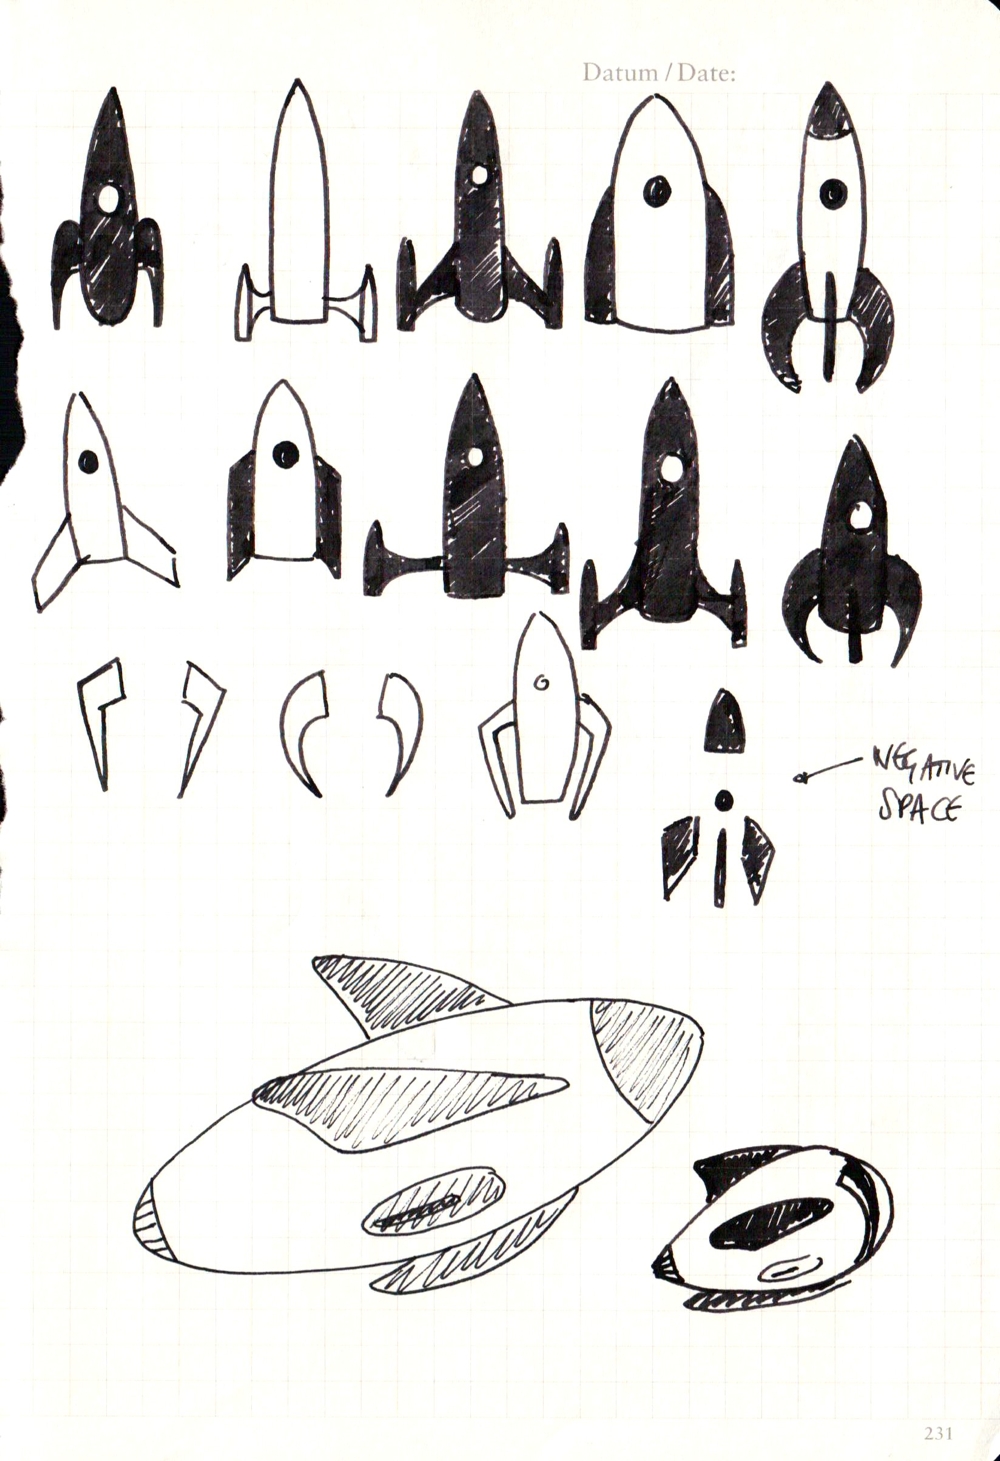 Rocket sketches from Indie Phone